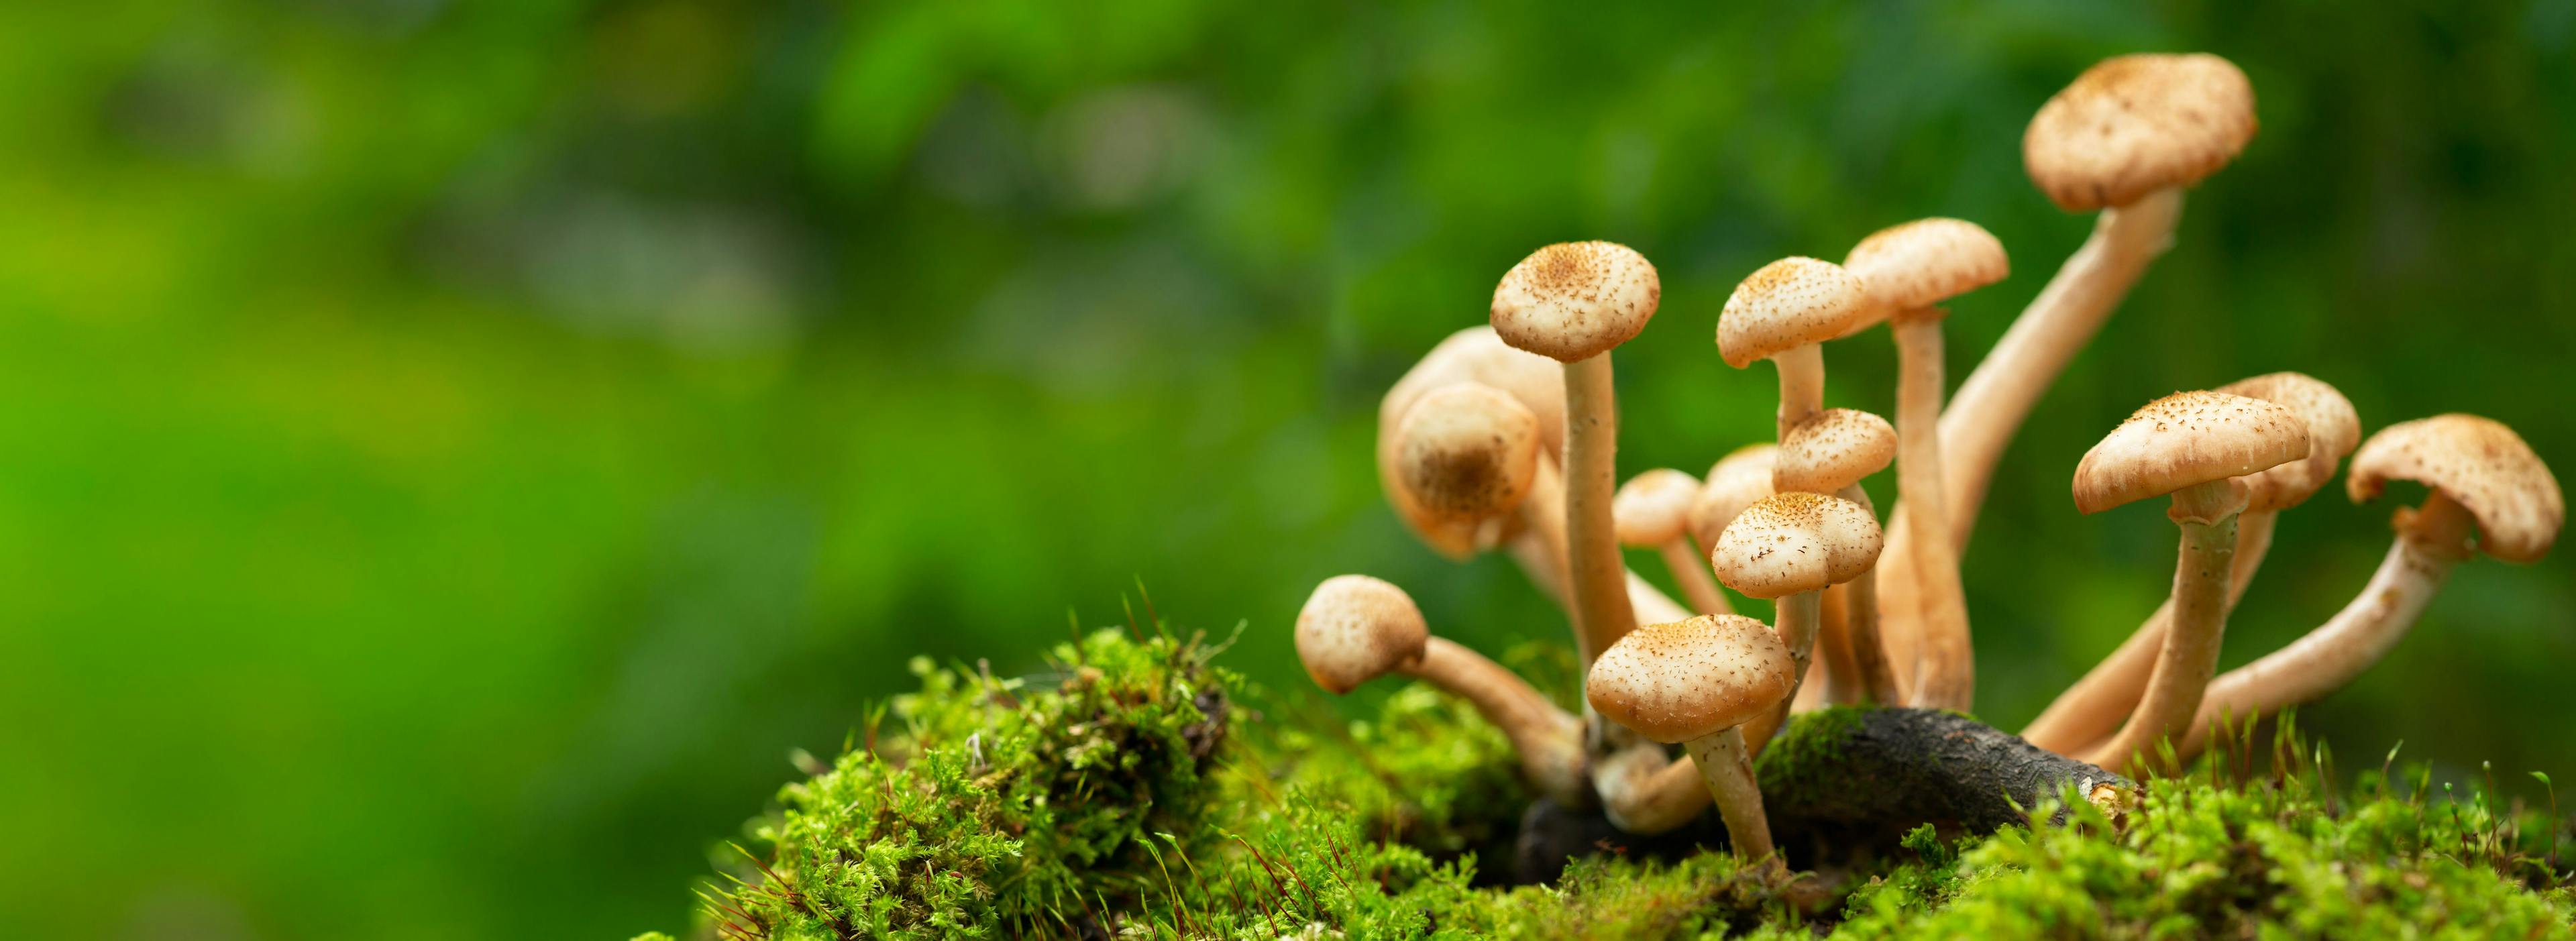 Edible mushrooms in a forest on green background | Image Credit: © Nitr - stock.adobe.com